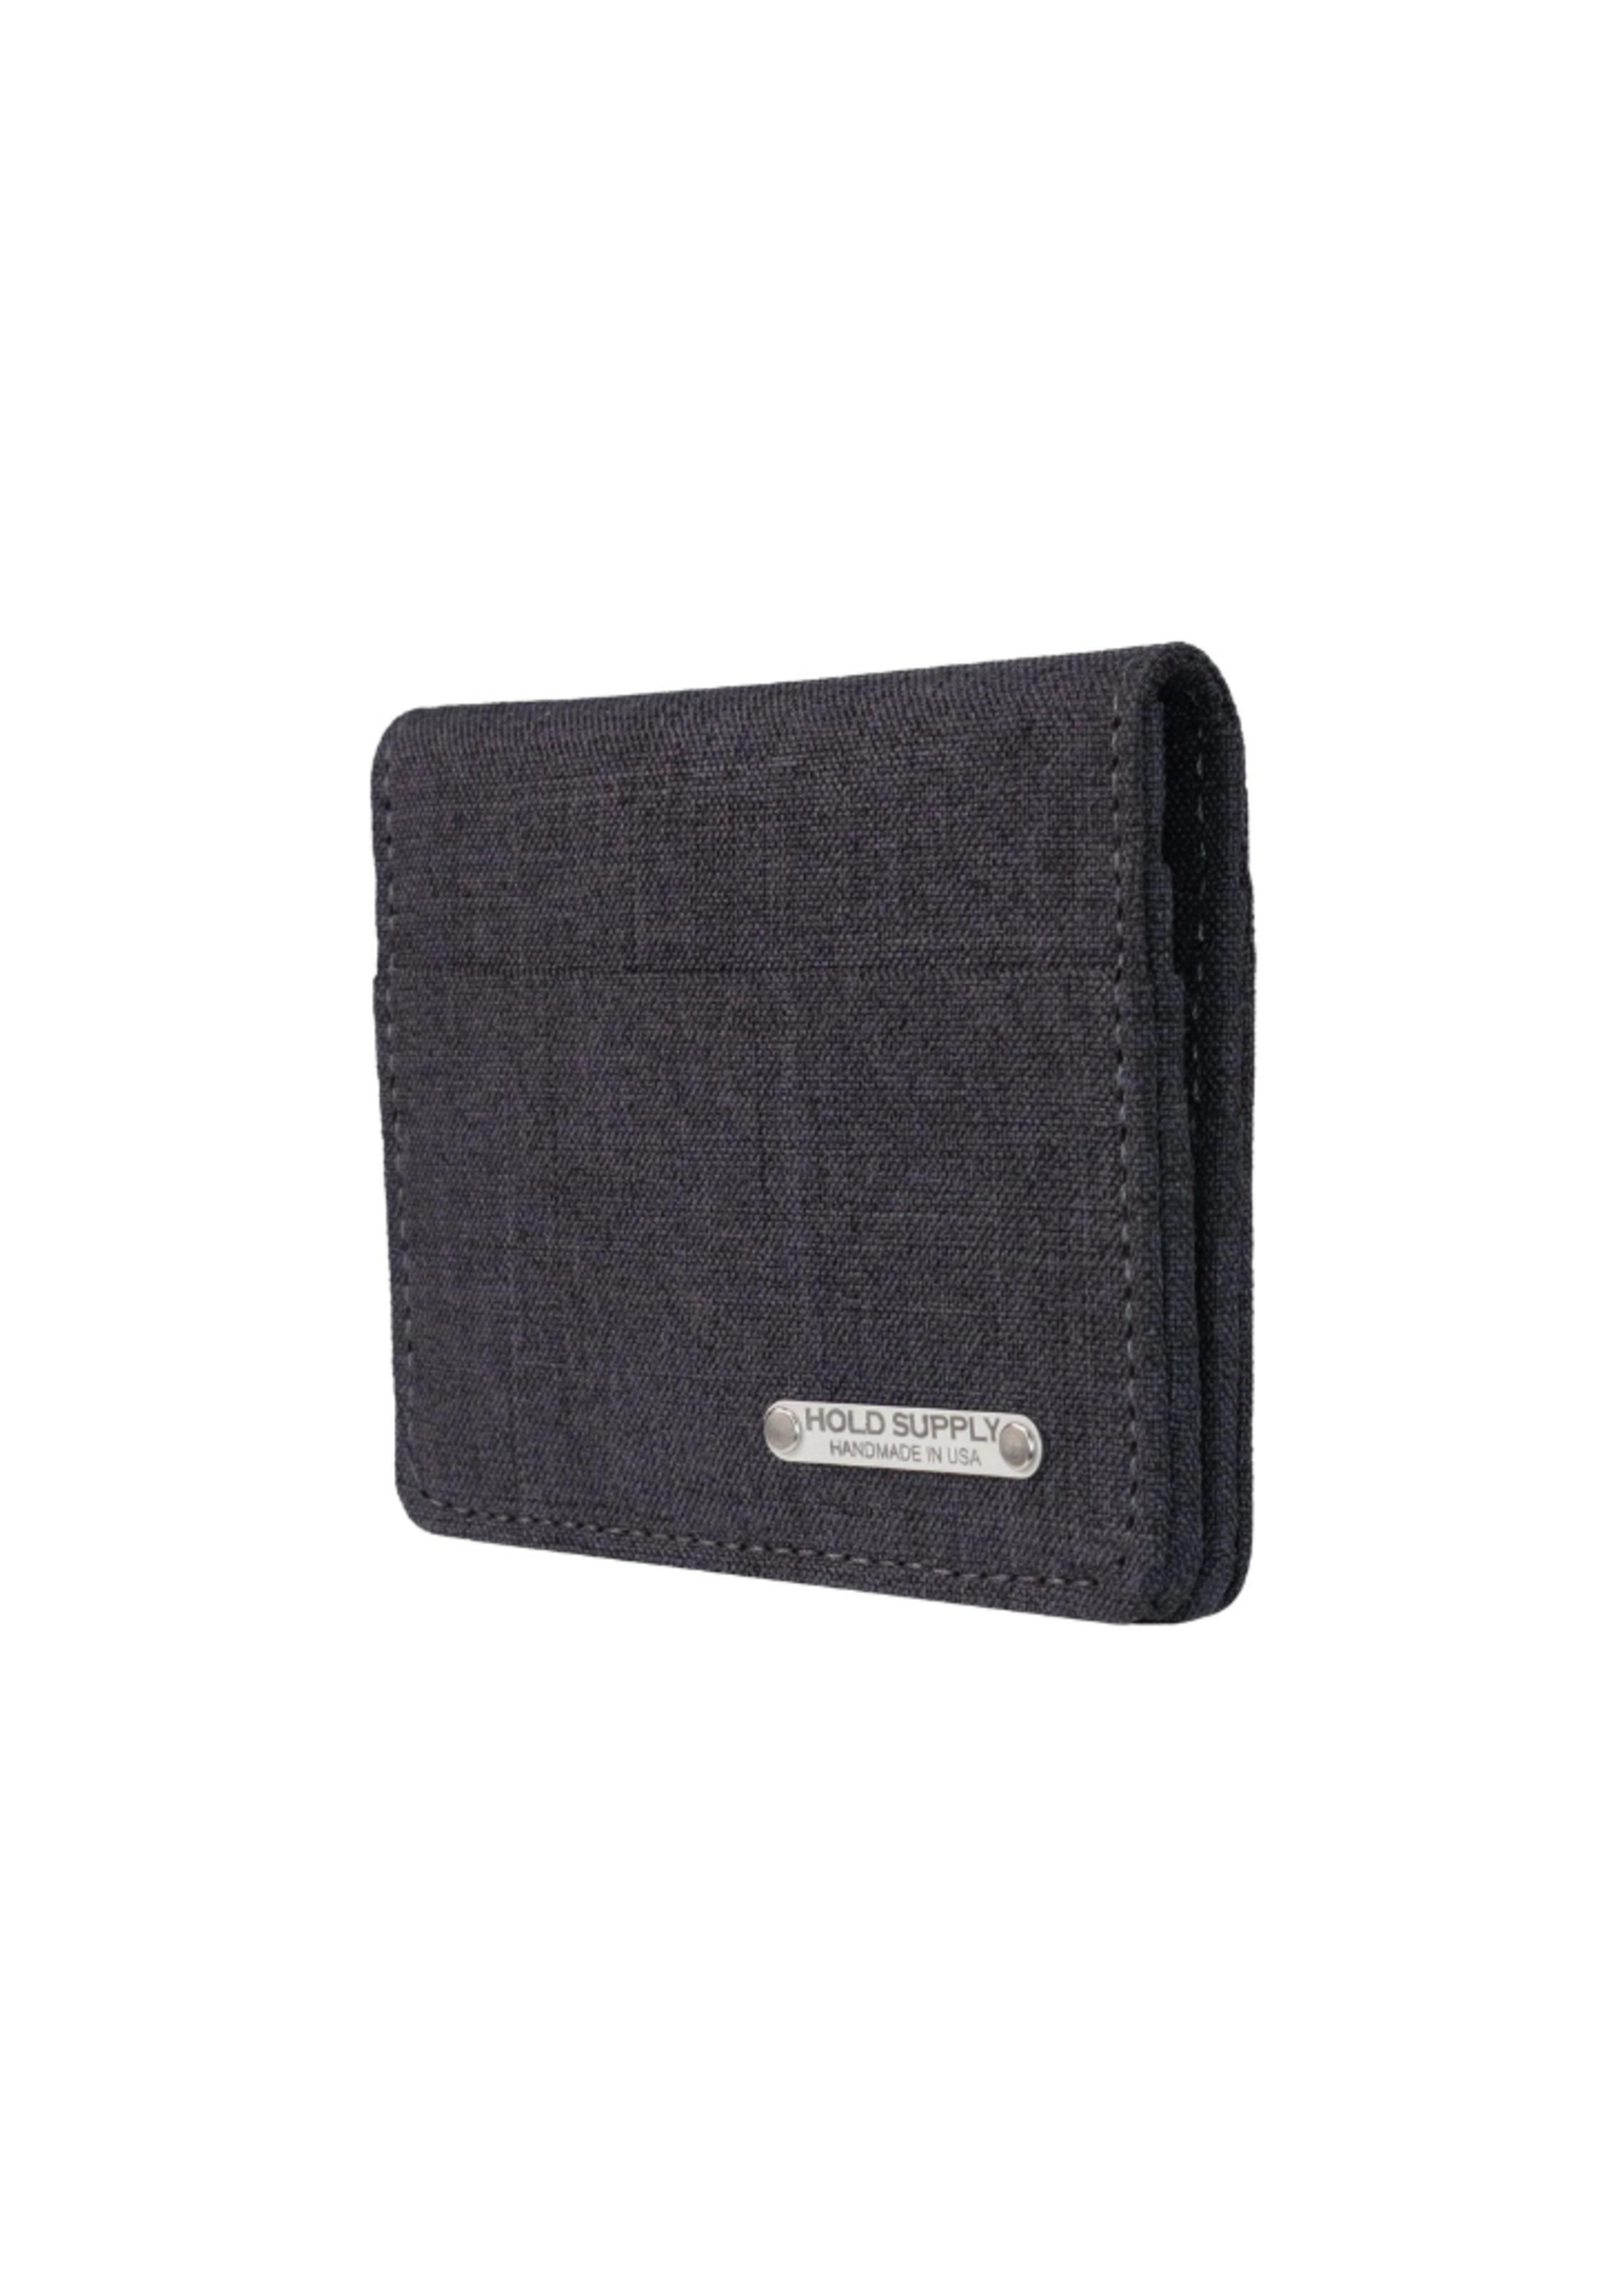 Hold Supply Co Gray Canvas Vertical Bifold Card & Cash Wallet